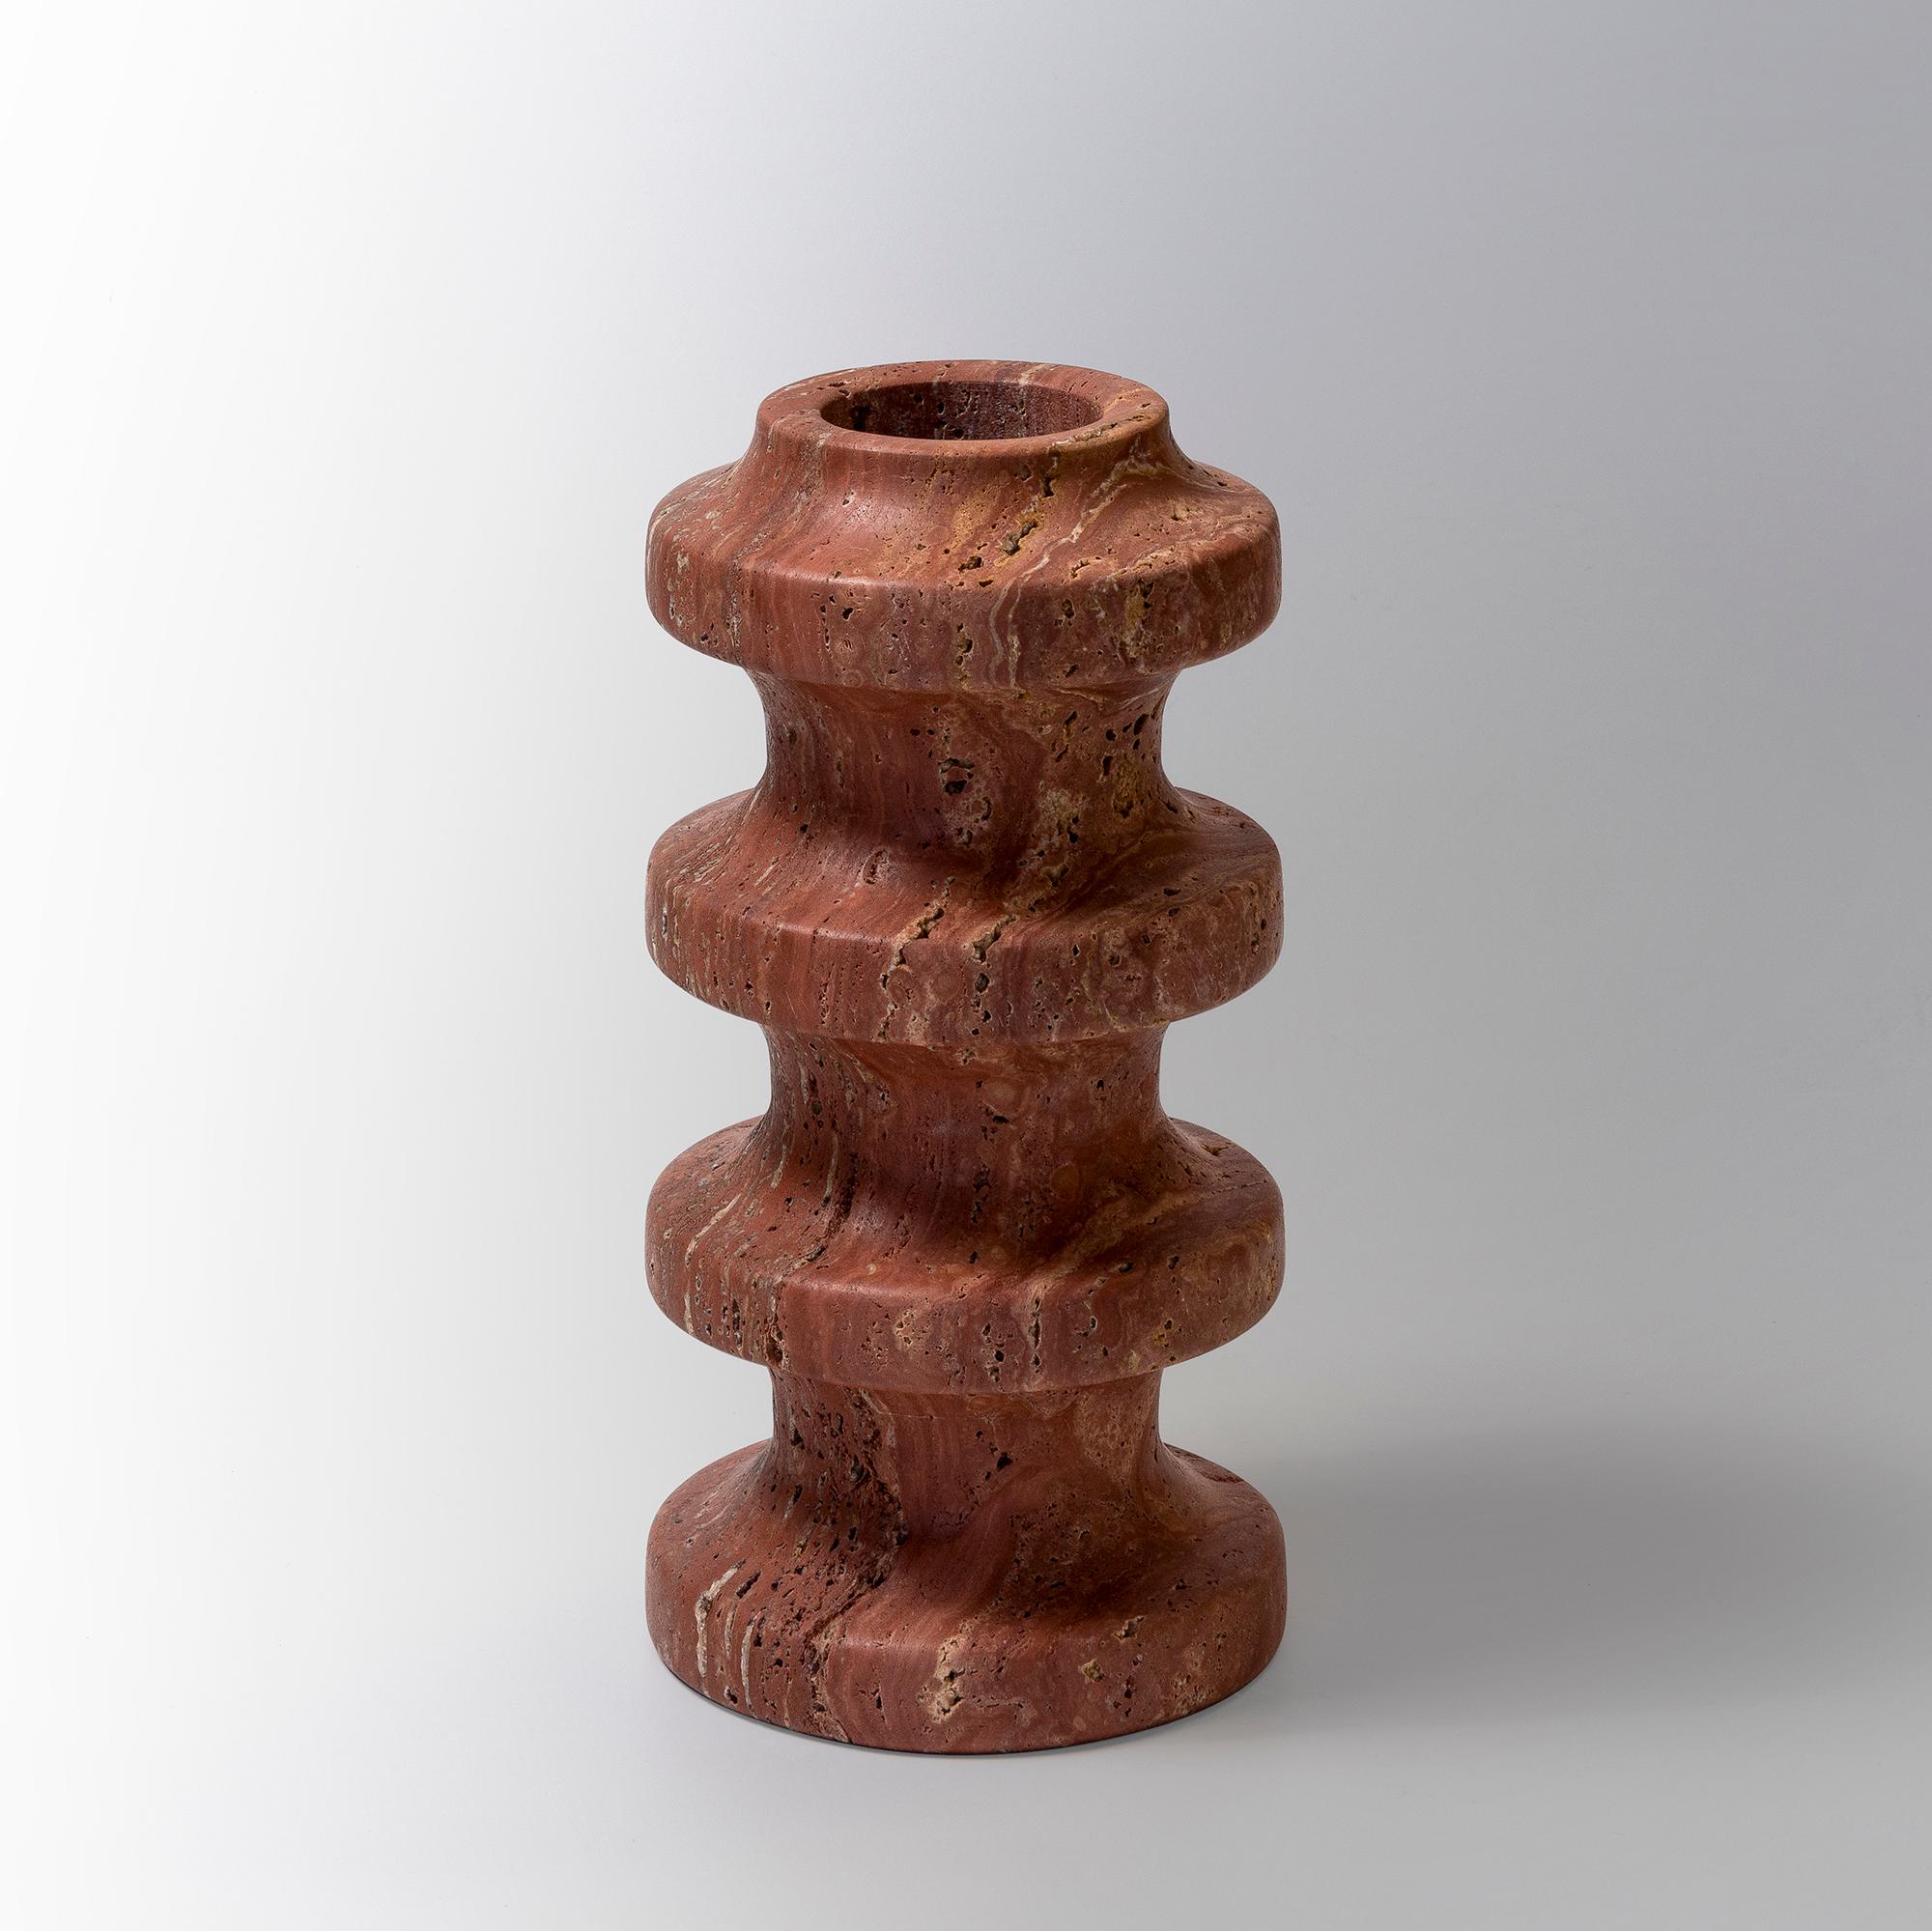 Red Travertine High Vase by Etamorph
Dimensions: Ø 13.5 x H 27 cm.
Materials: Red Travertine.

Available in different stone options. Please contact us. 

ETAMORPH is a NYC-based design boutique studio specializing in contemporary objects, custom